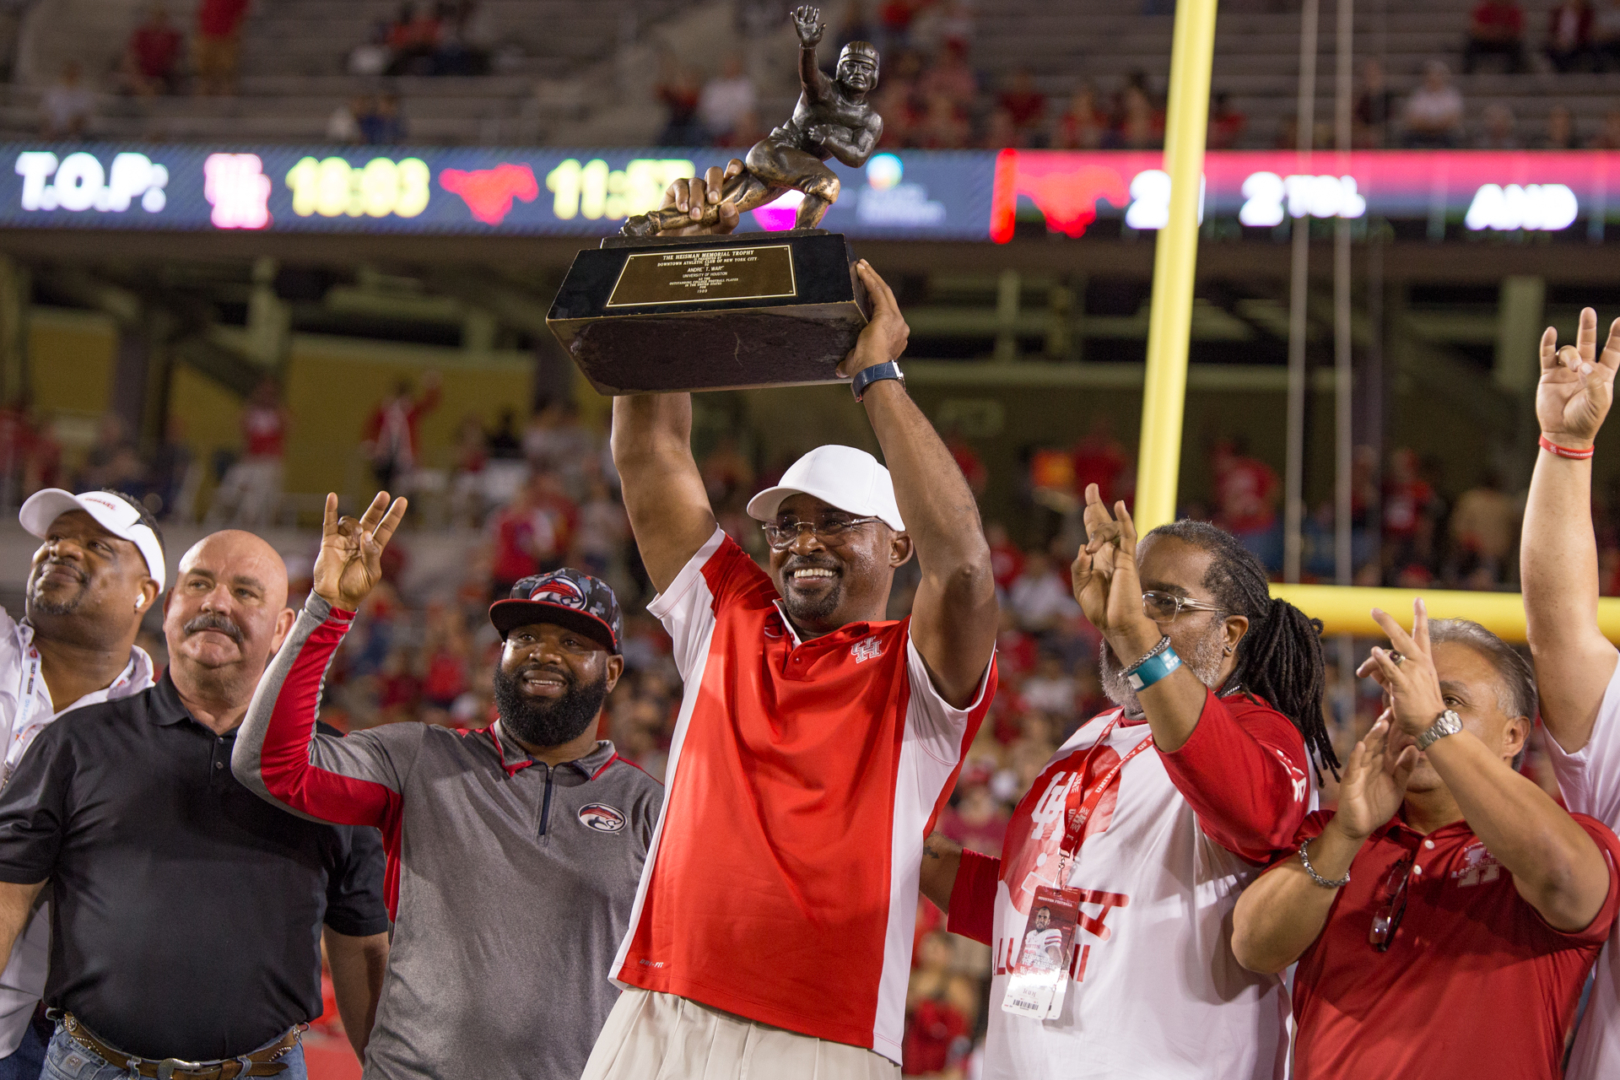 Heisman Trophy winner Andre Ware and the 1989 Cougars were honored in 2019 during halftime against SMU. | Trevor Nolley/The Cougar